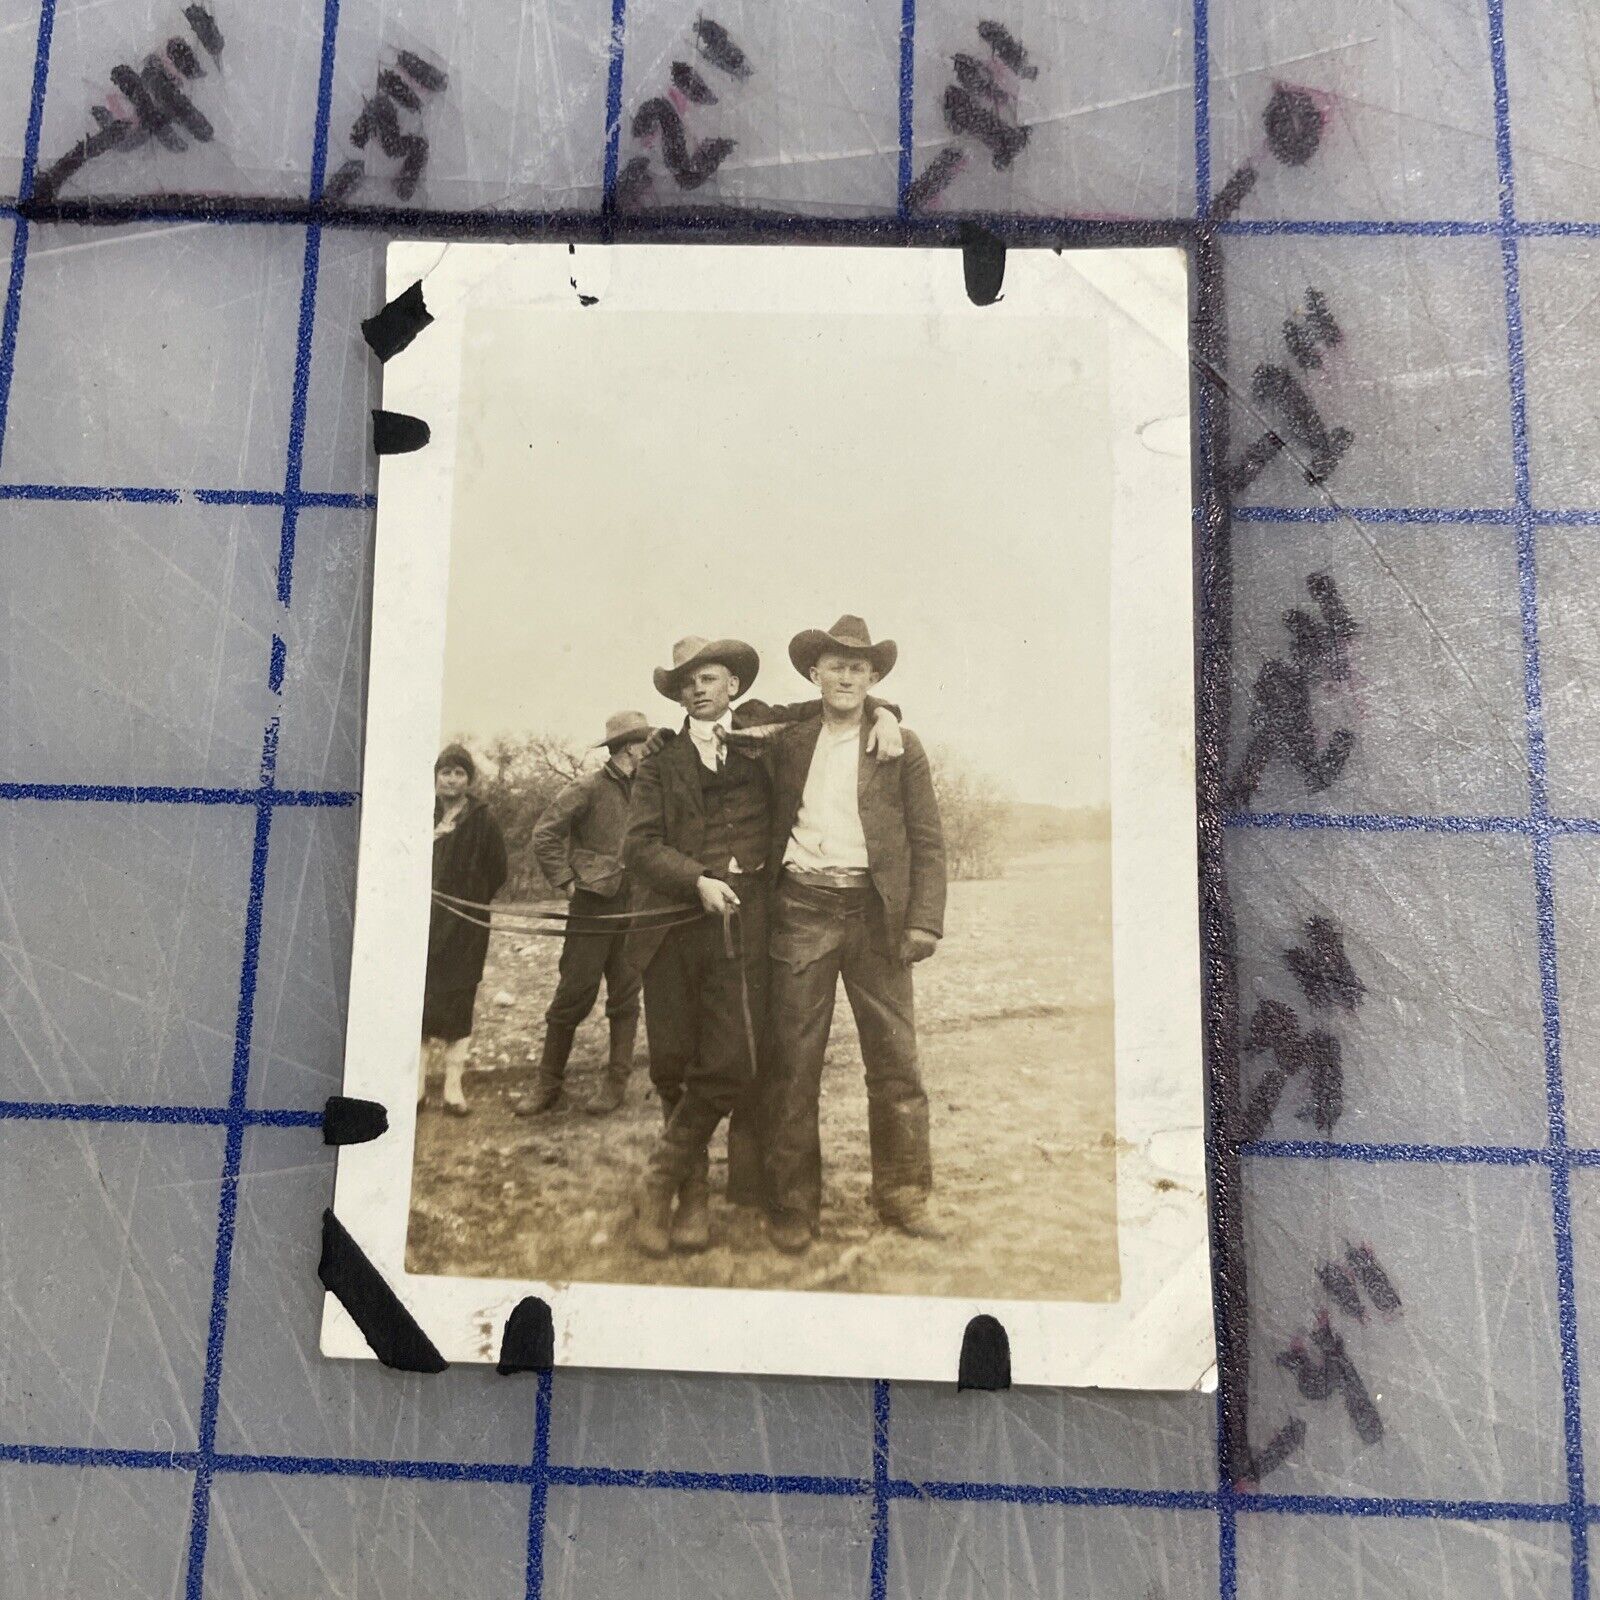 Vintage Photograph Cowboys 1920s Western Affectionate Rural Rugged Friends